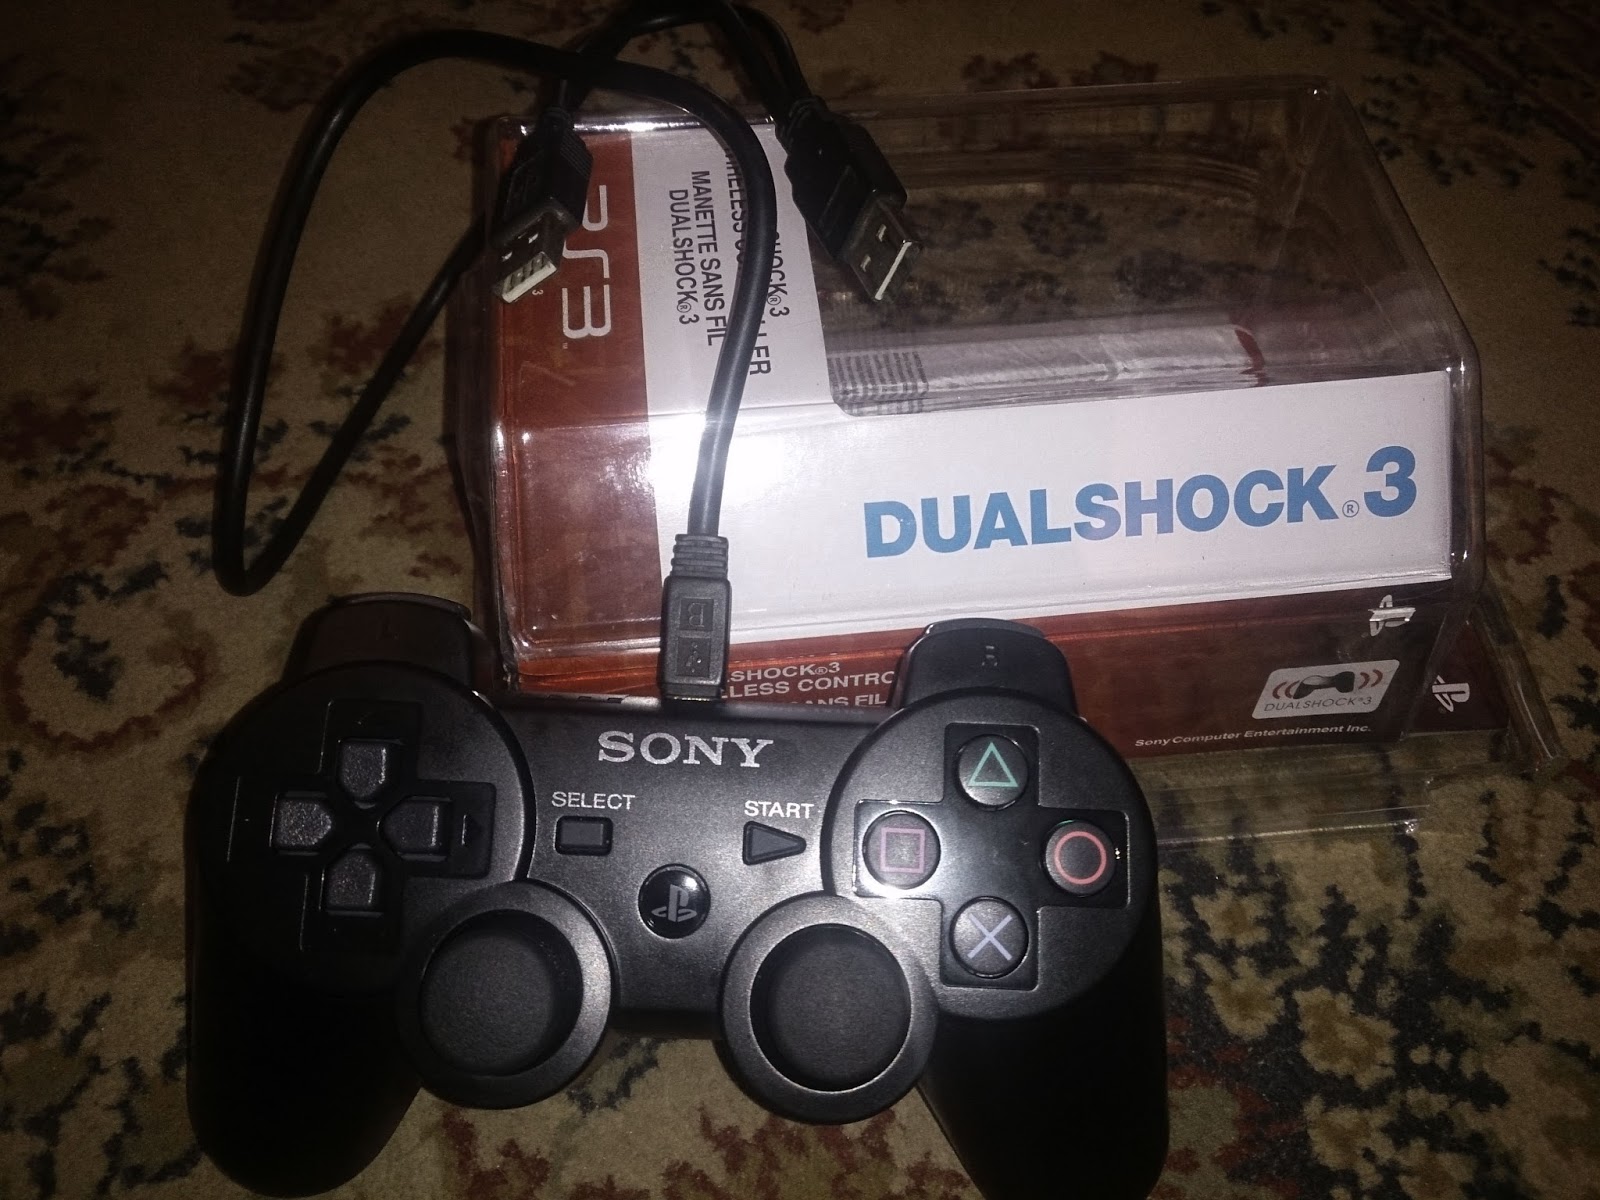 How To Set PS3 Controller Category Back To Game Controller, PC Unspecified